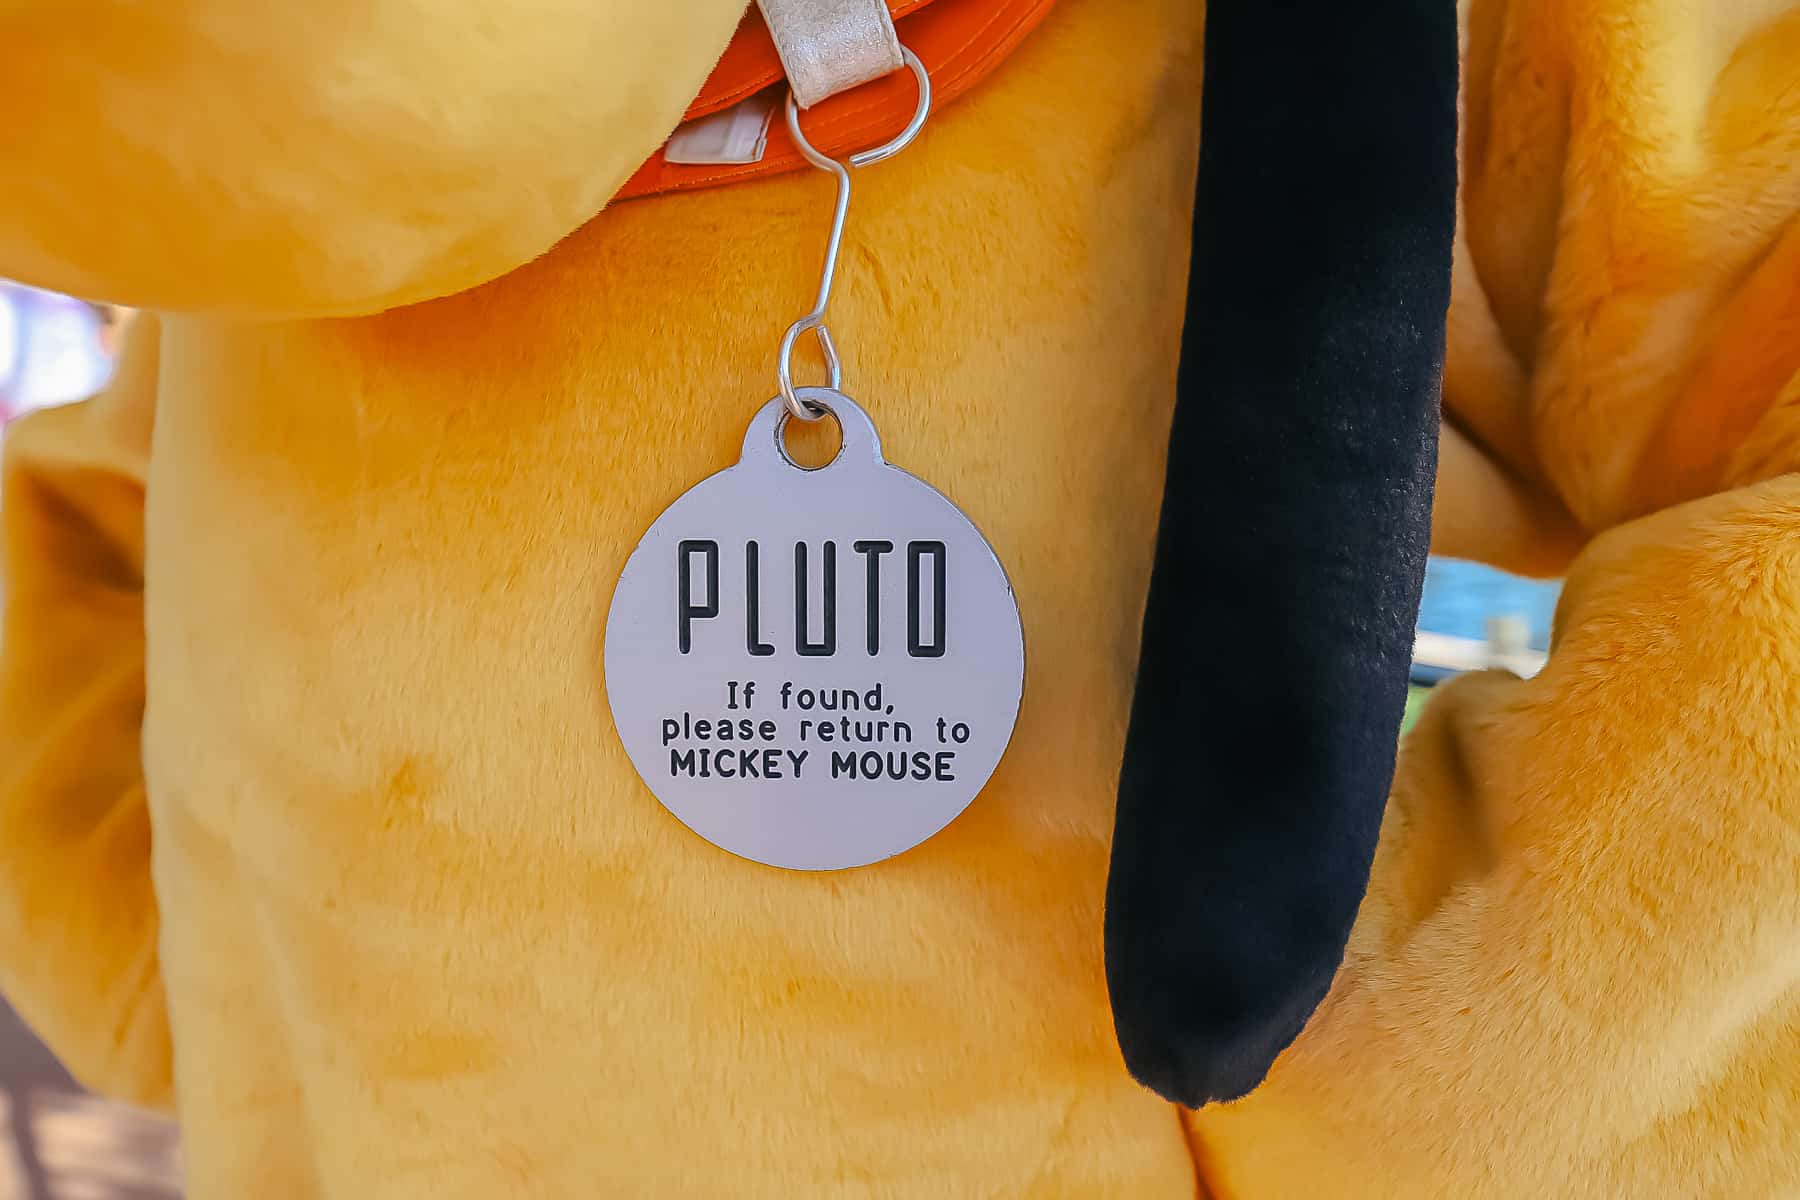 Pluto's dog tag says "Pluto If found, please return to Mickey Mouse."